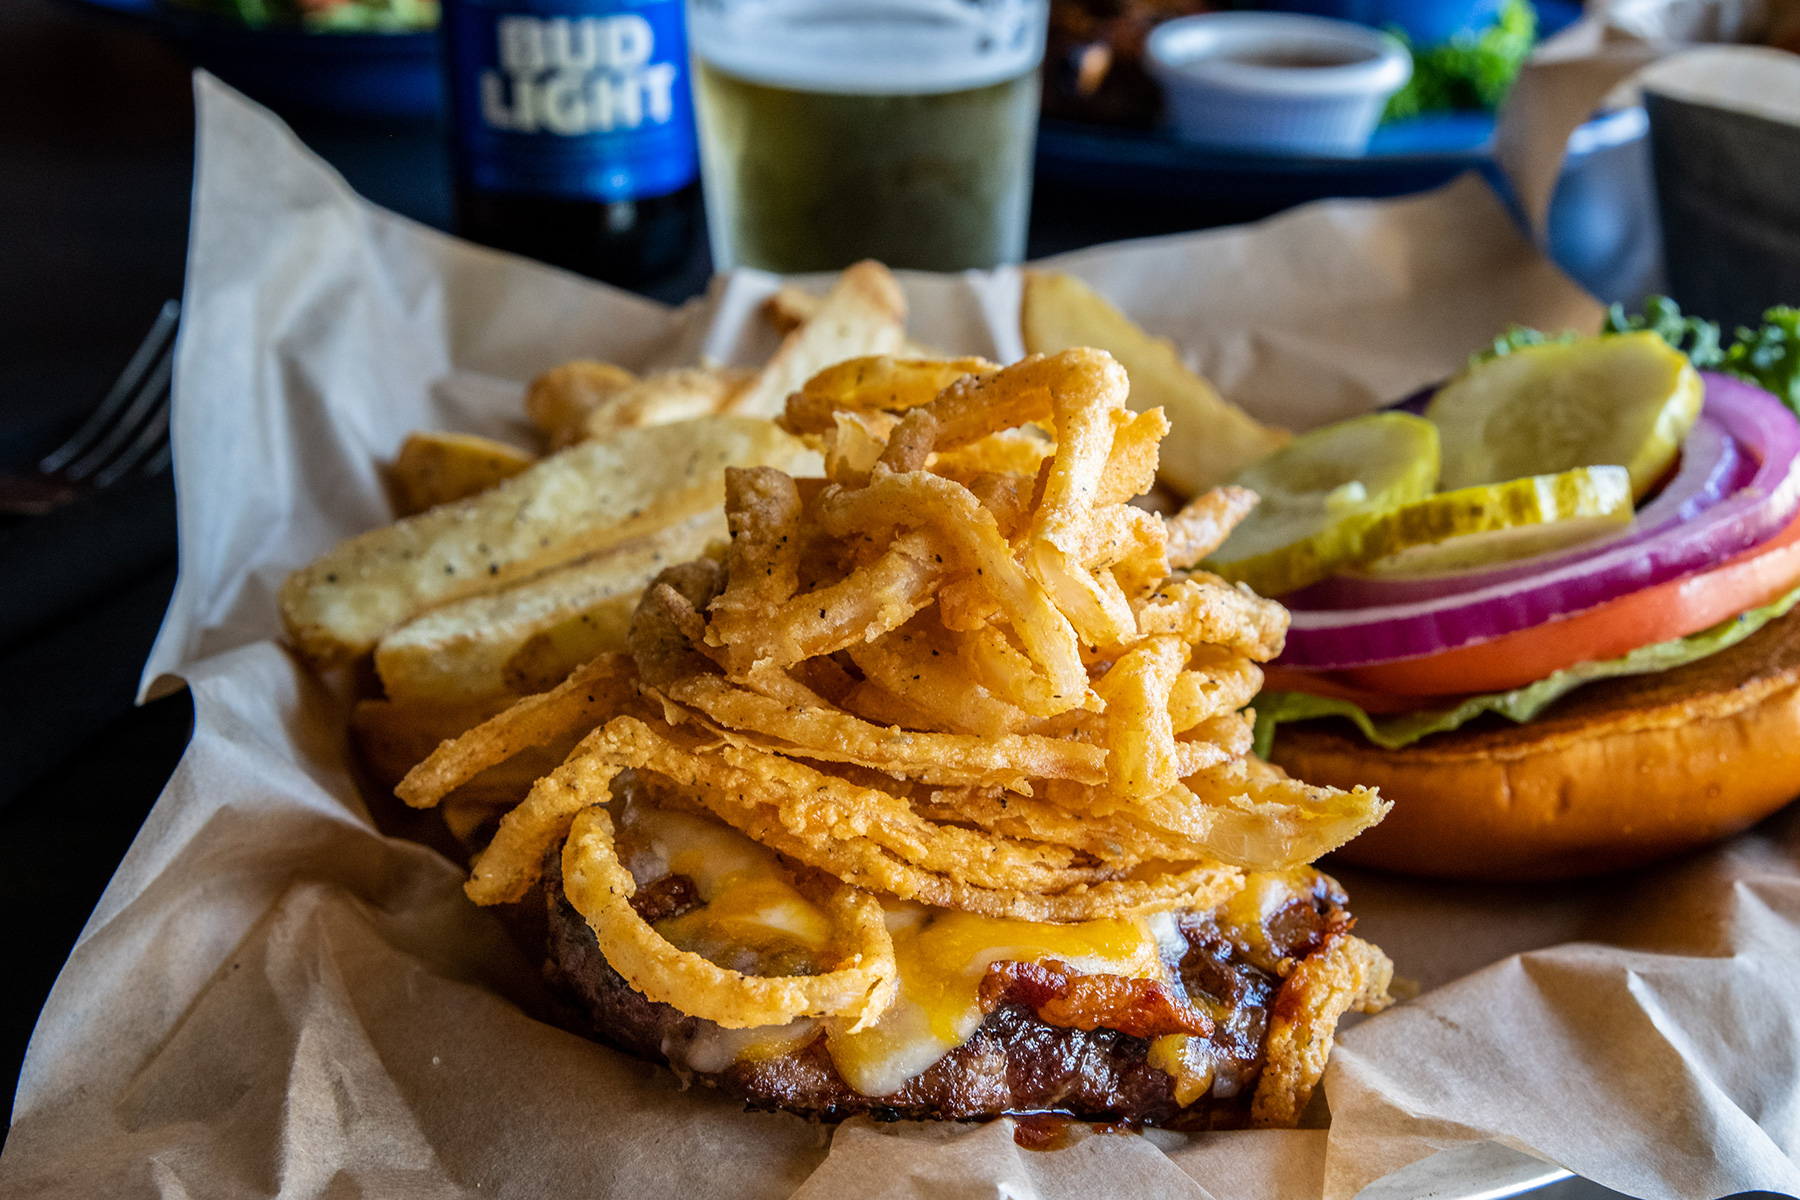 The mouthwatering Hoffbrau Steak & Grill House’s Brazos burger and all the fixings.